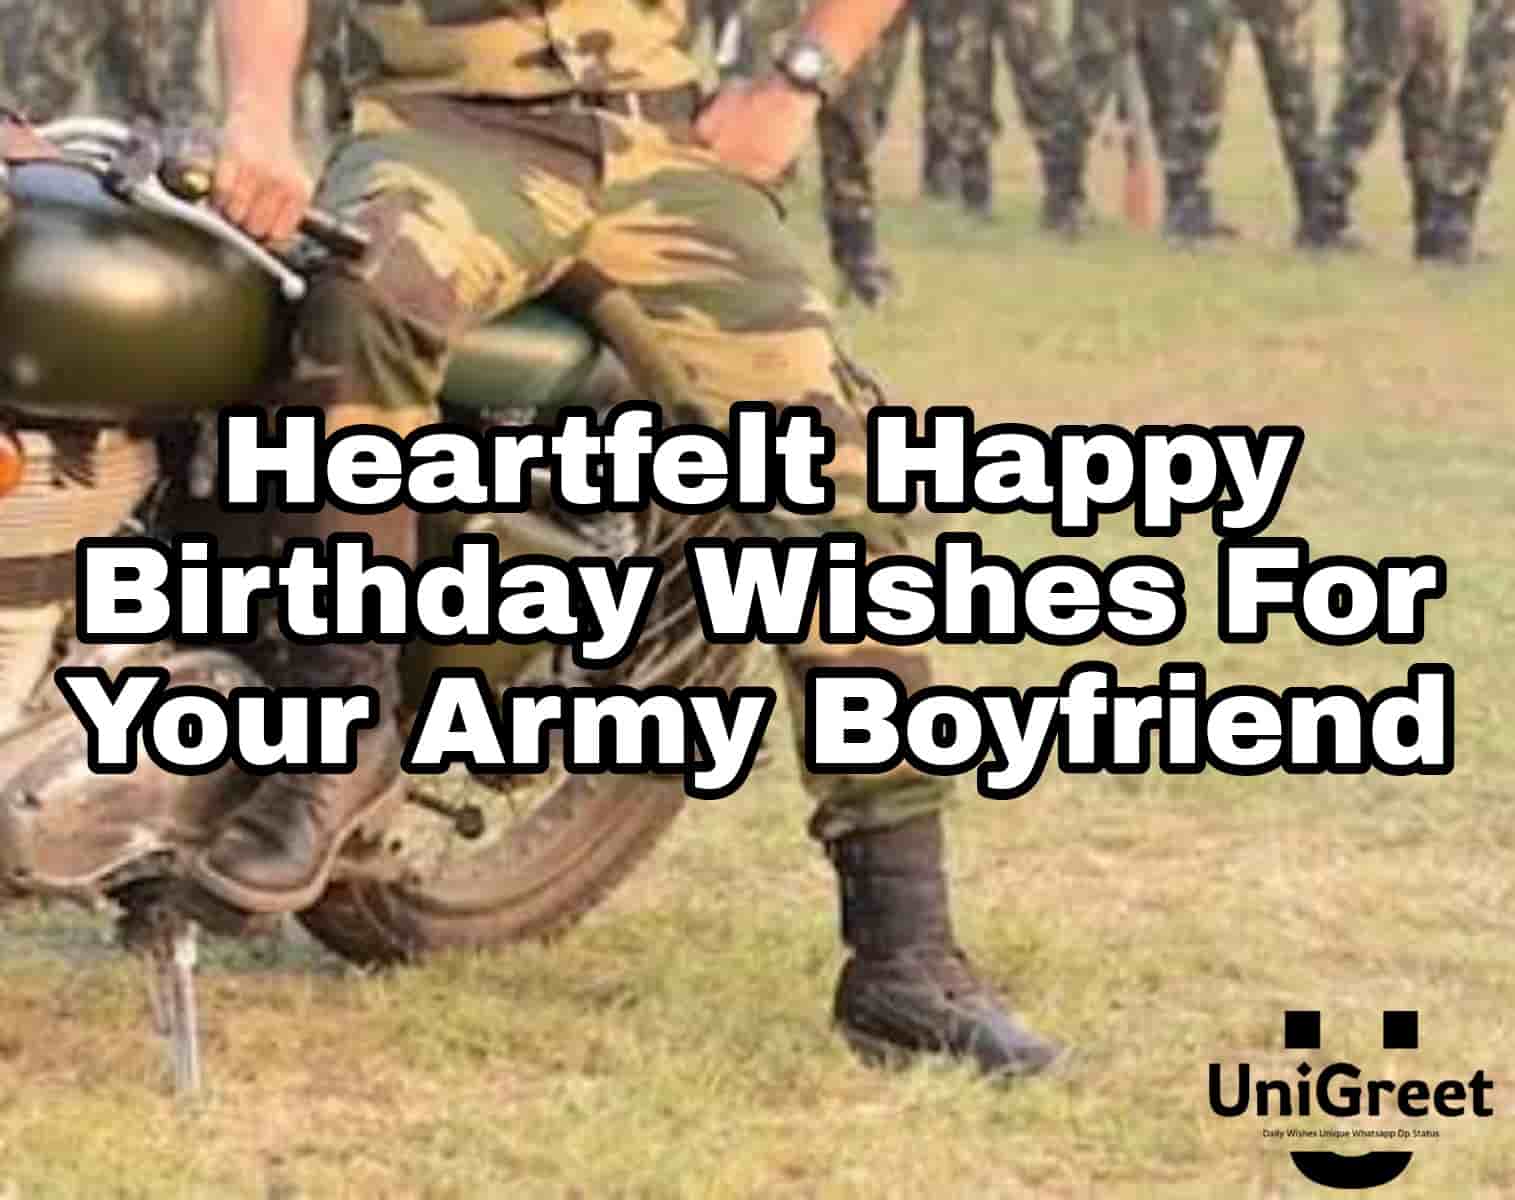 52 Happy Birthday Wishes For Your Army Boyfriend | Show Your Love ...